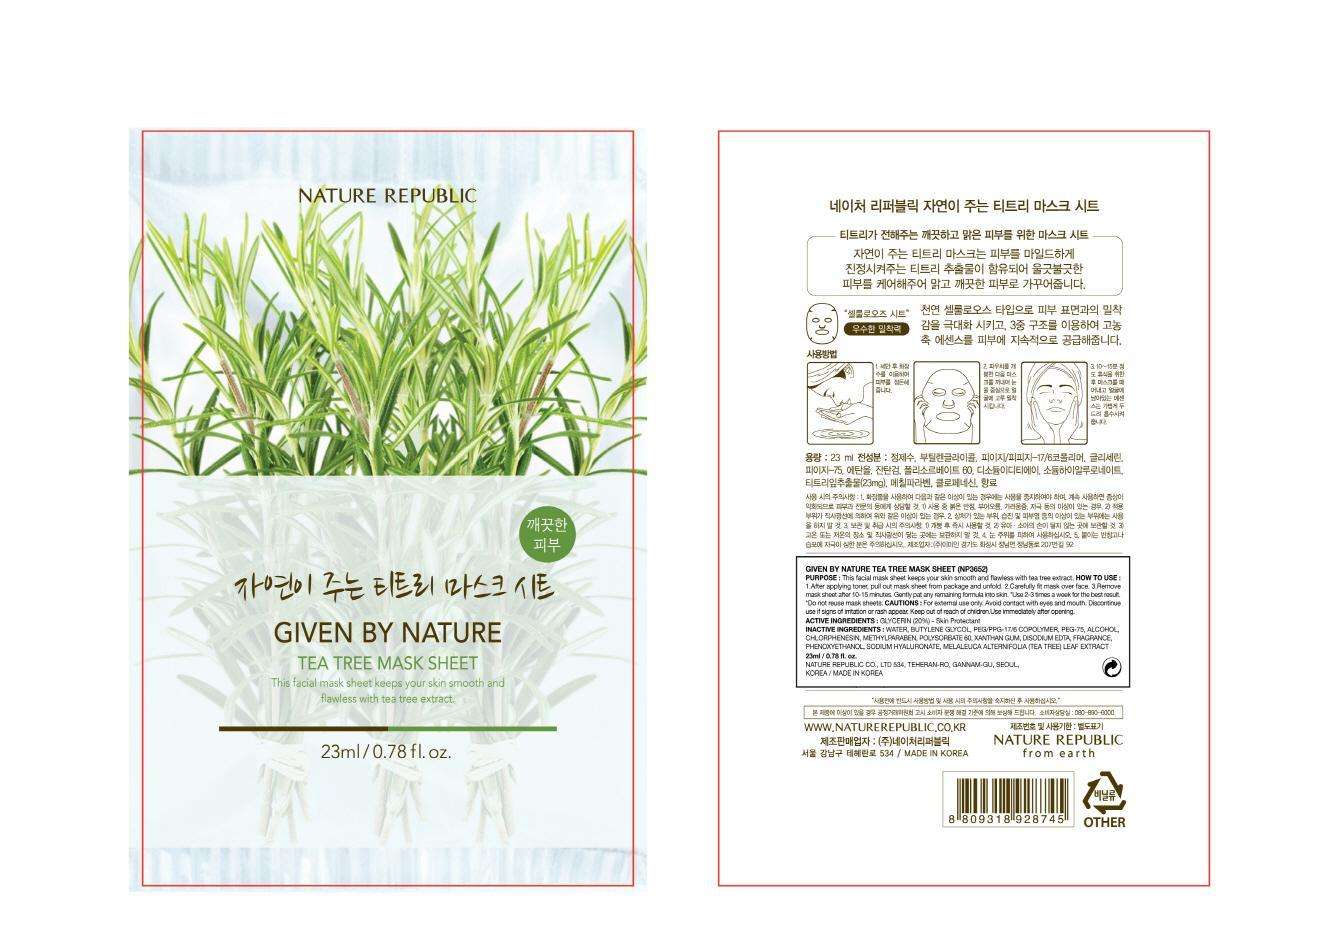 GIVEN BY NATURE TEA TREE MASK SHEET